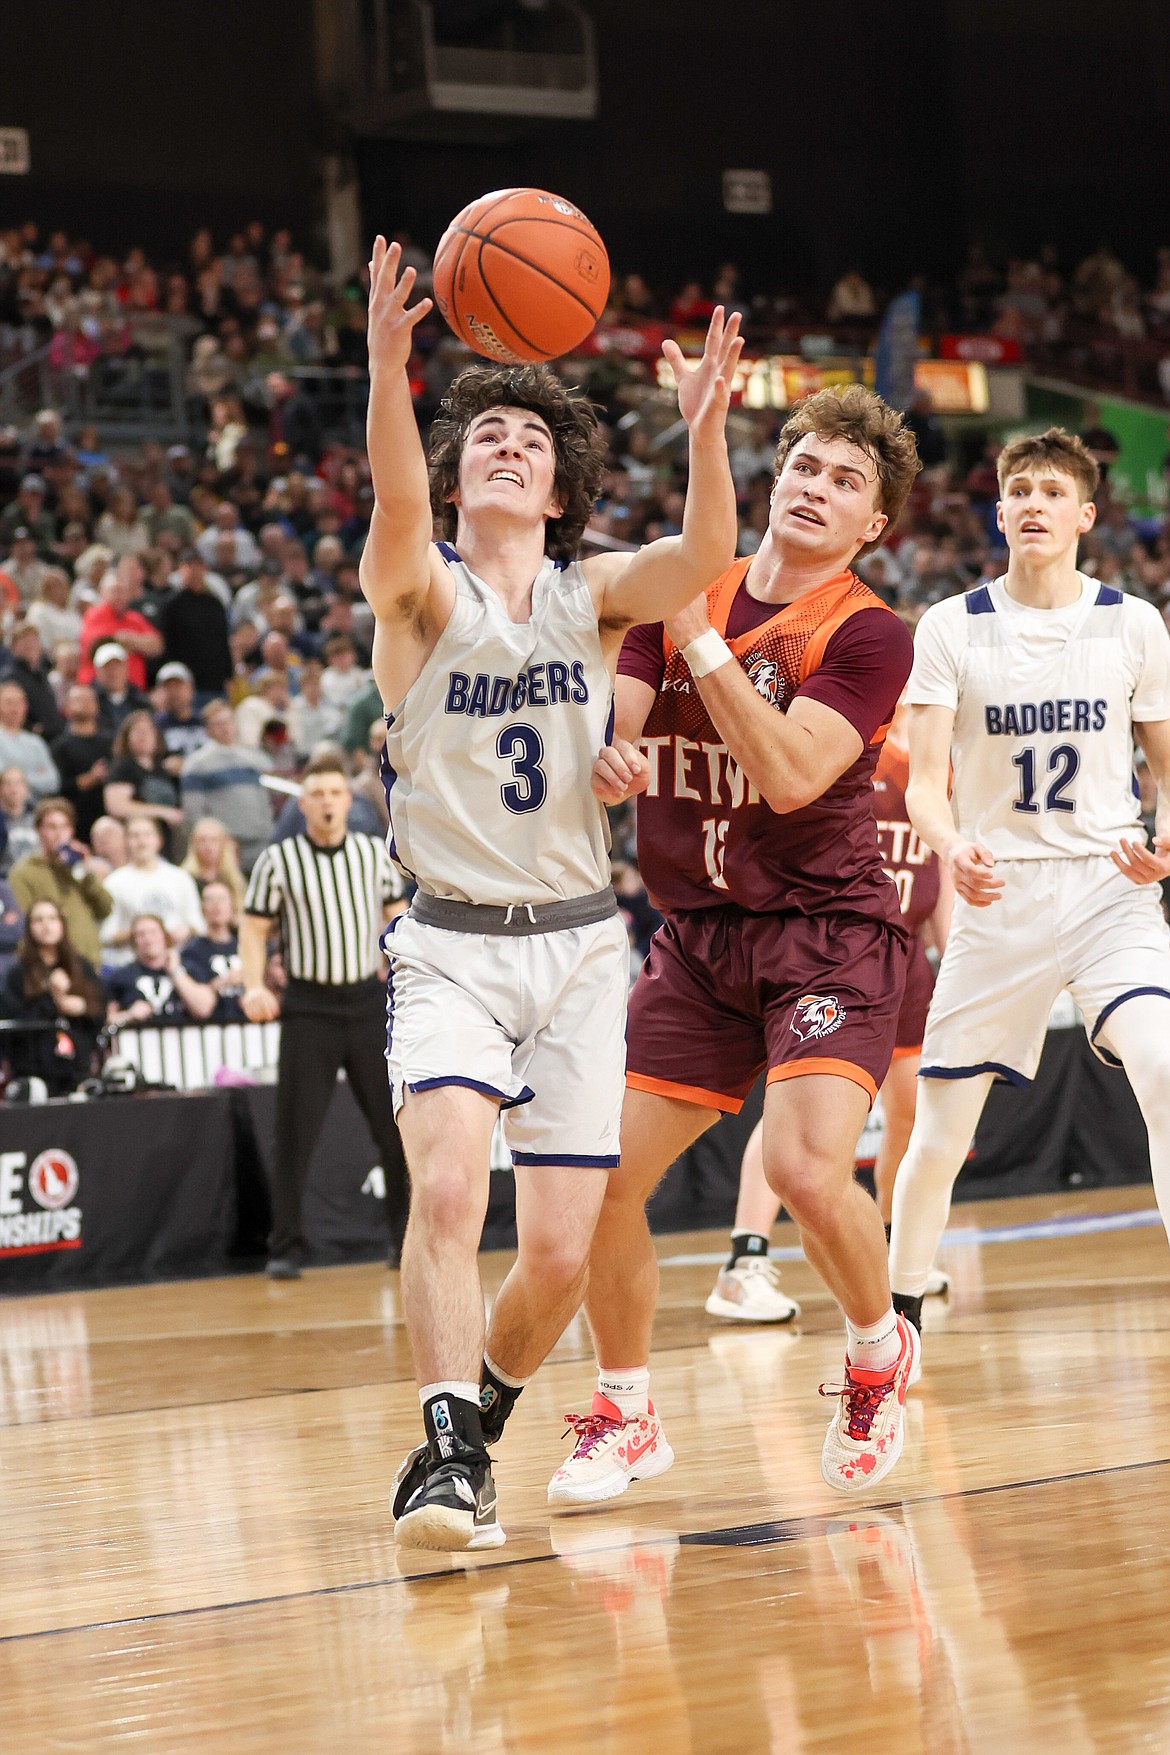 Eli Blackmore nabs a defensive rebound at the 3A State Championship game on March 2 at the Idaho Center.